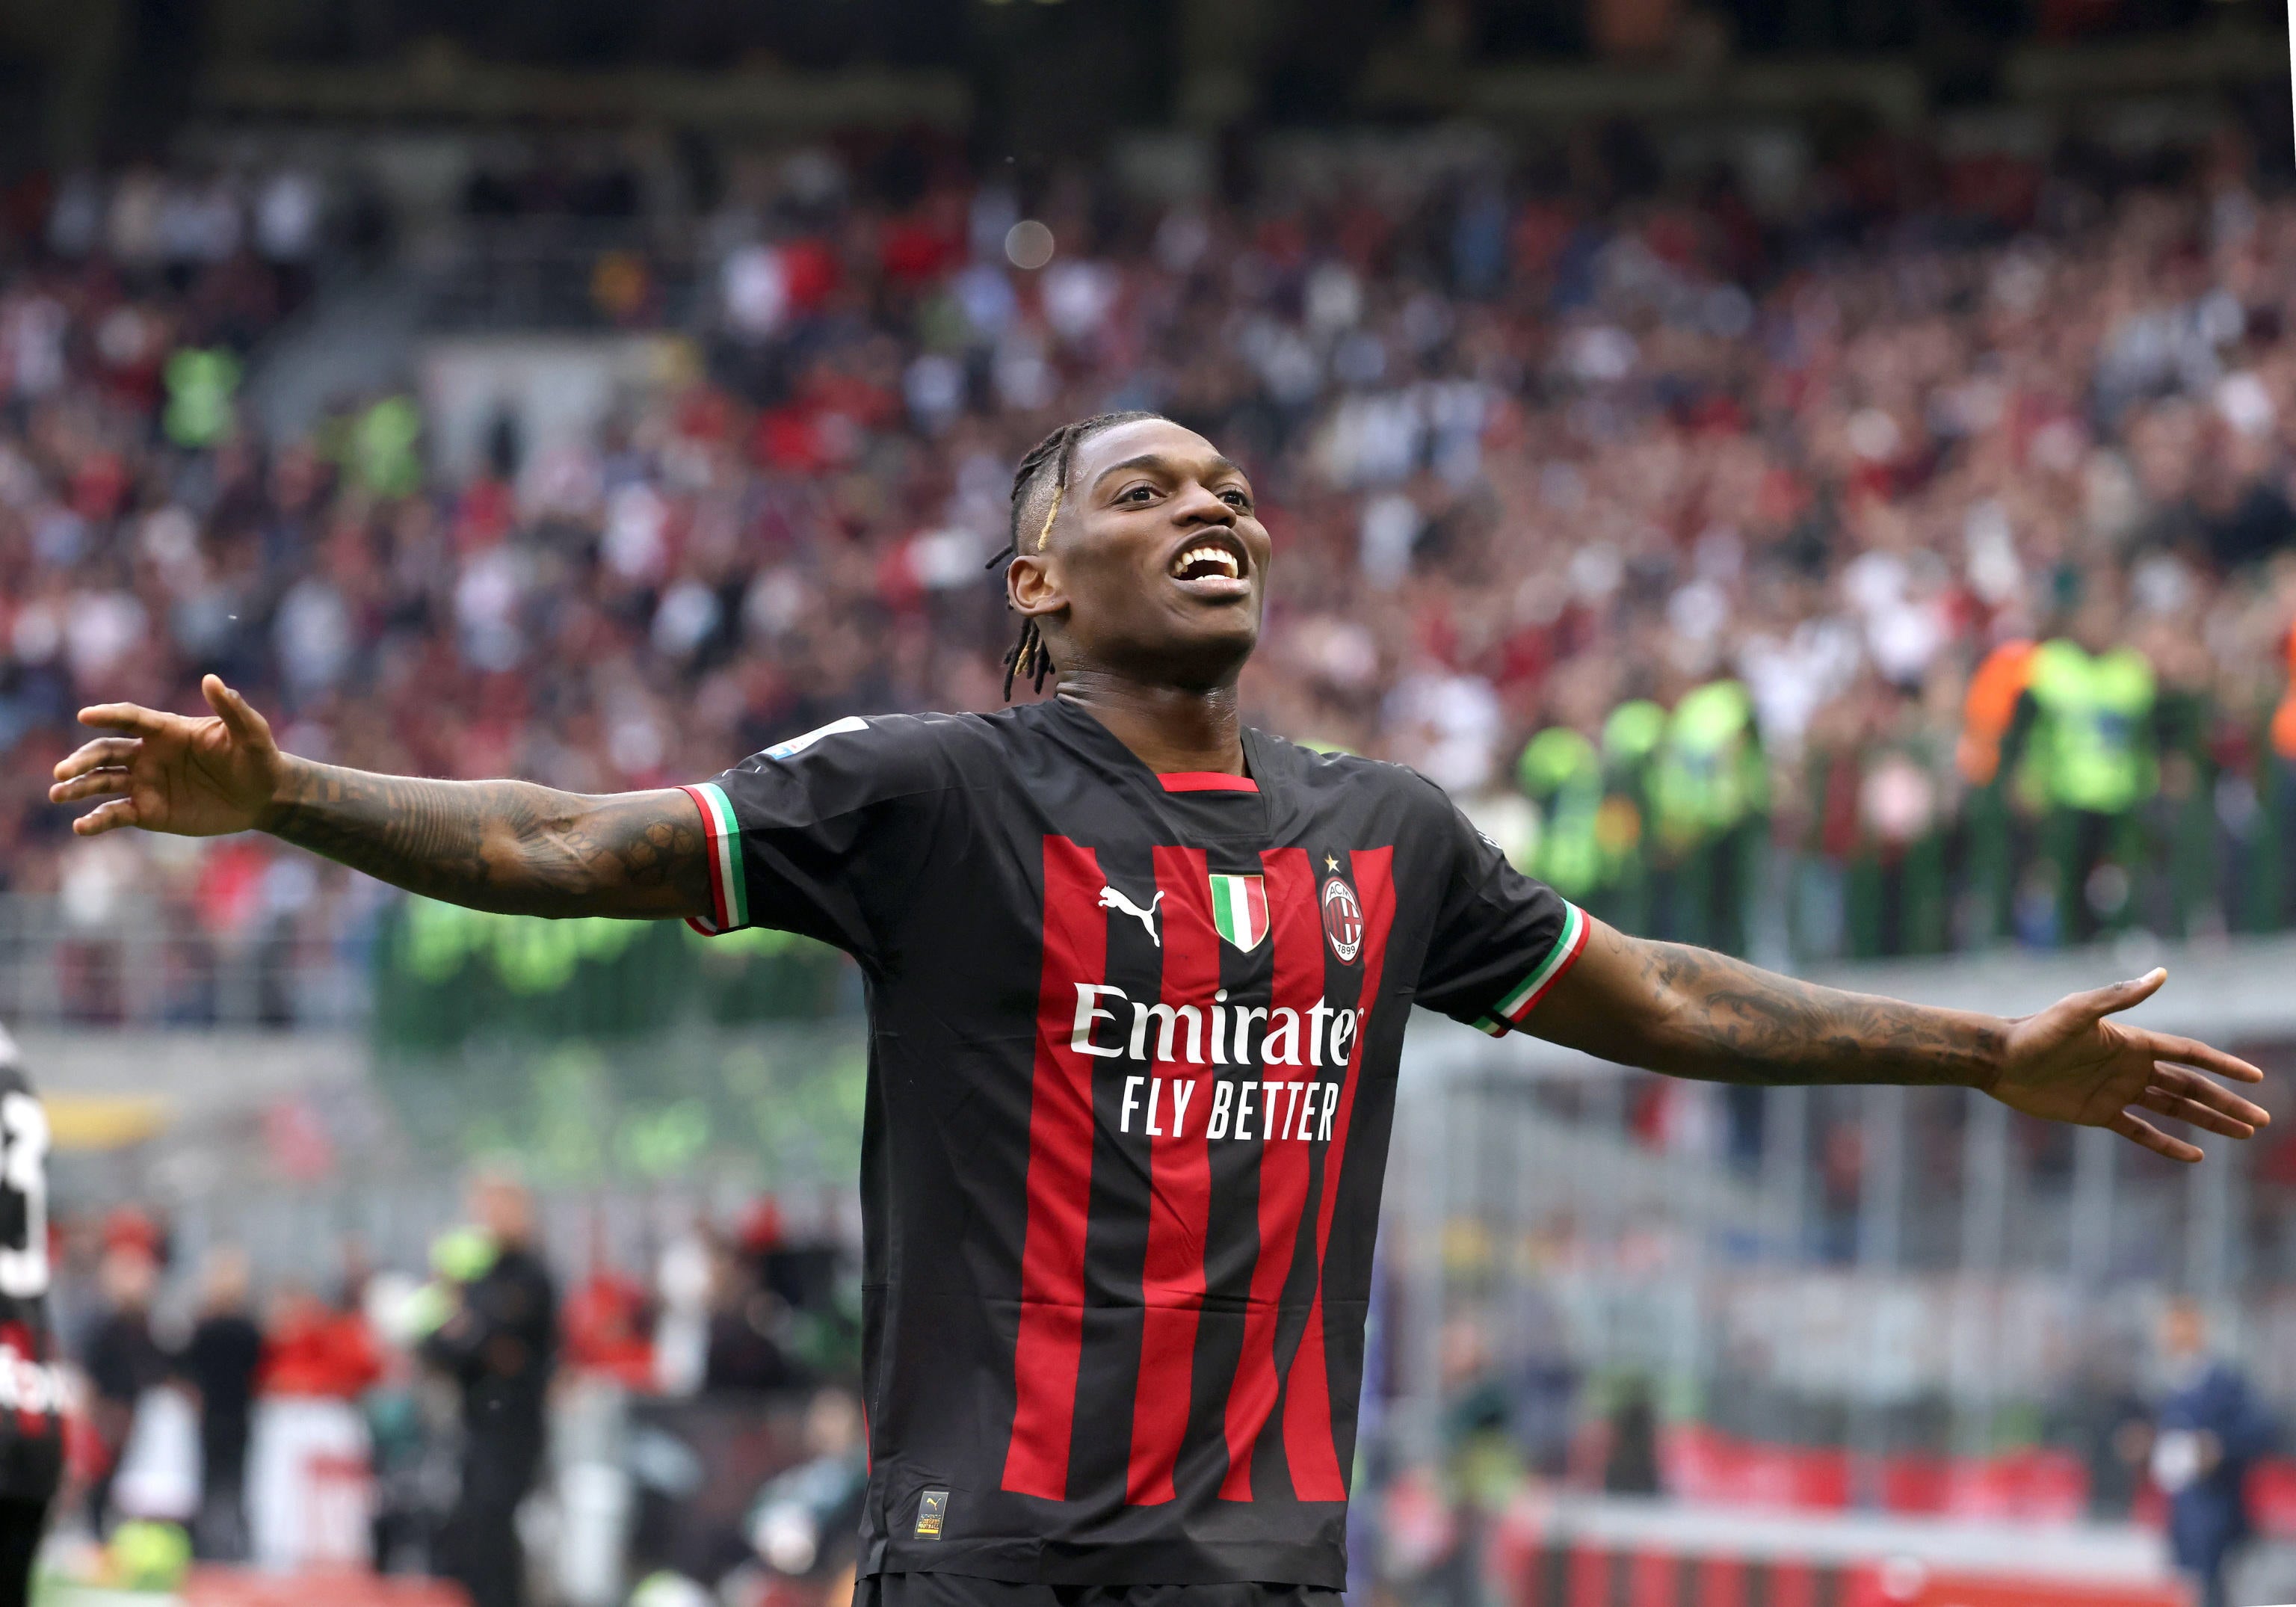 transfusion Alvorlig TVsæt Being confronted by fans and returning star driving AC Milan bid to reverse  history | The Independent